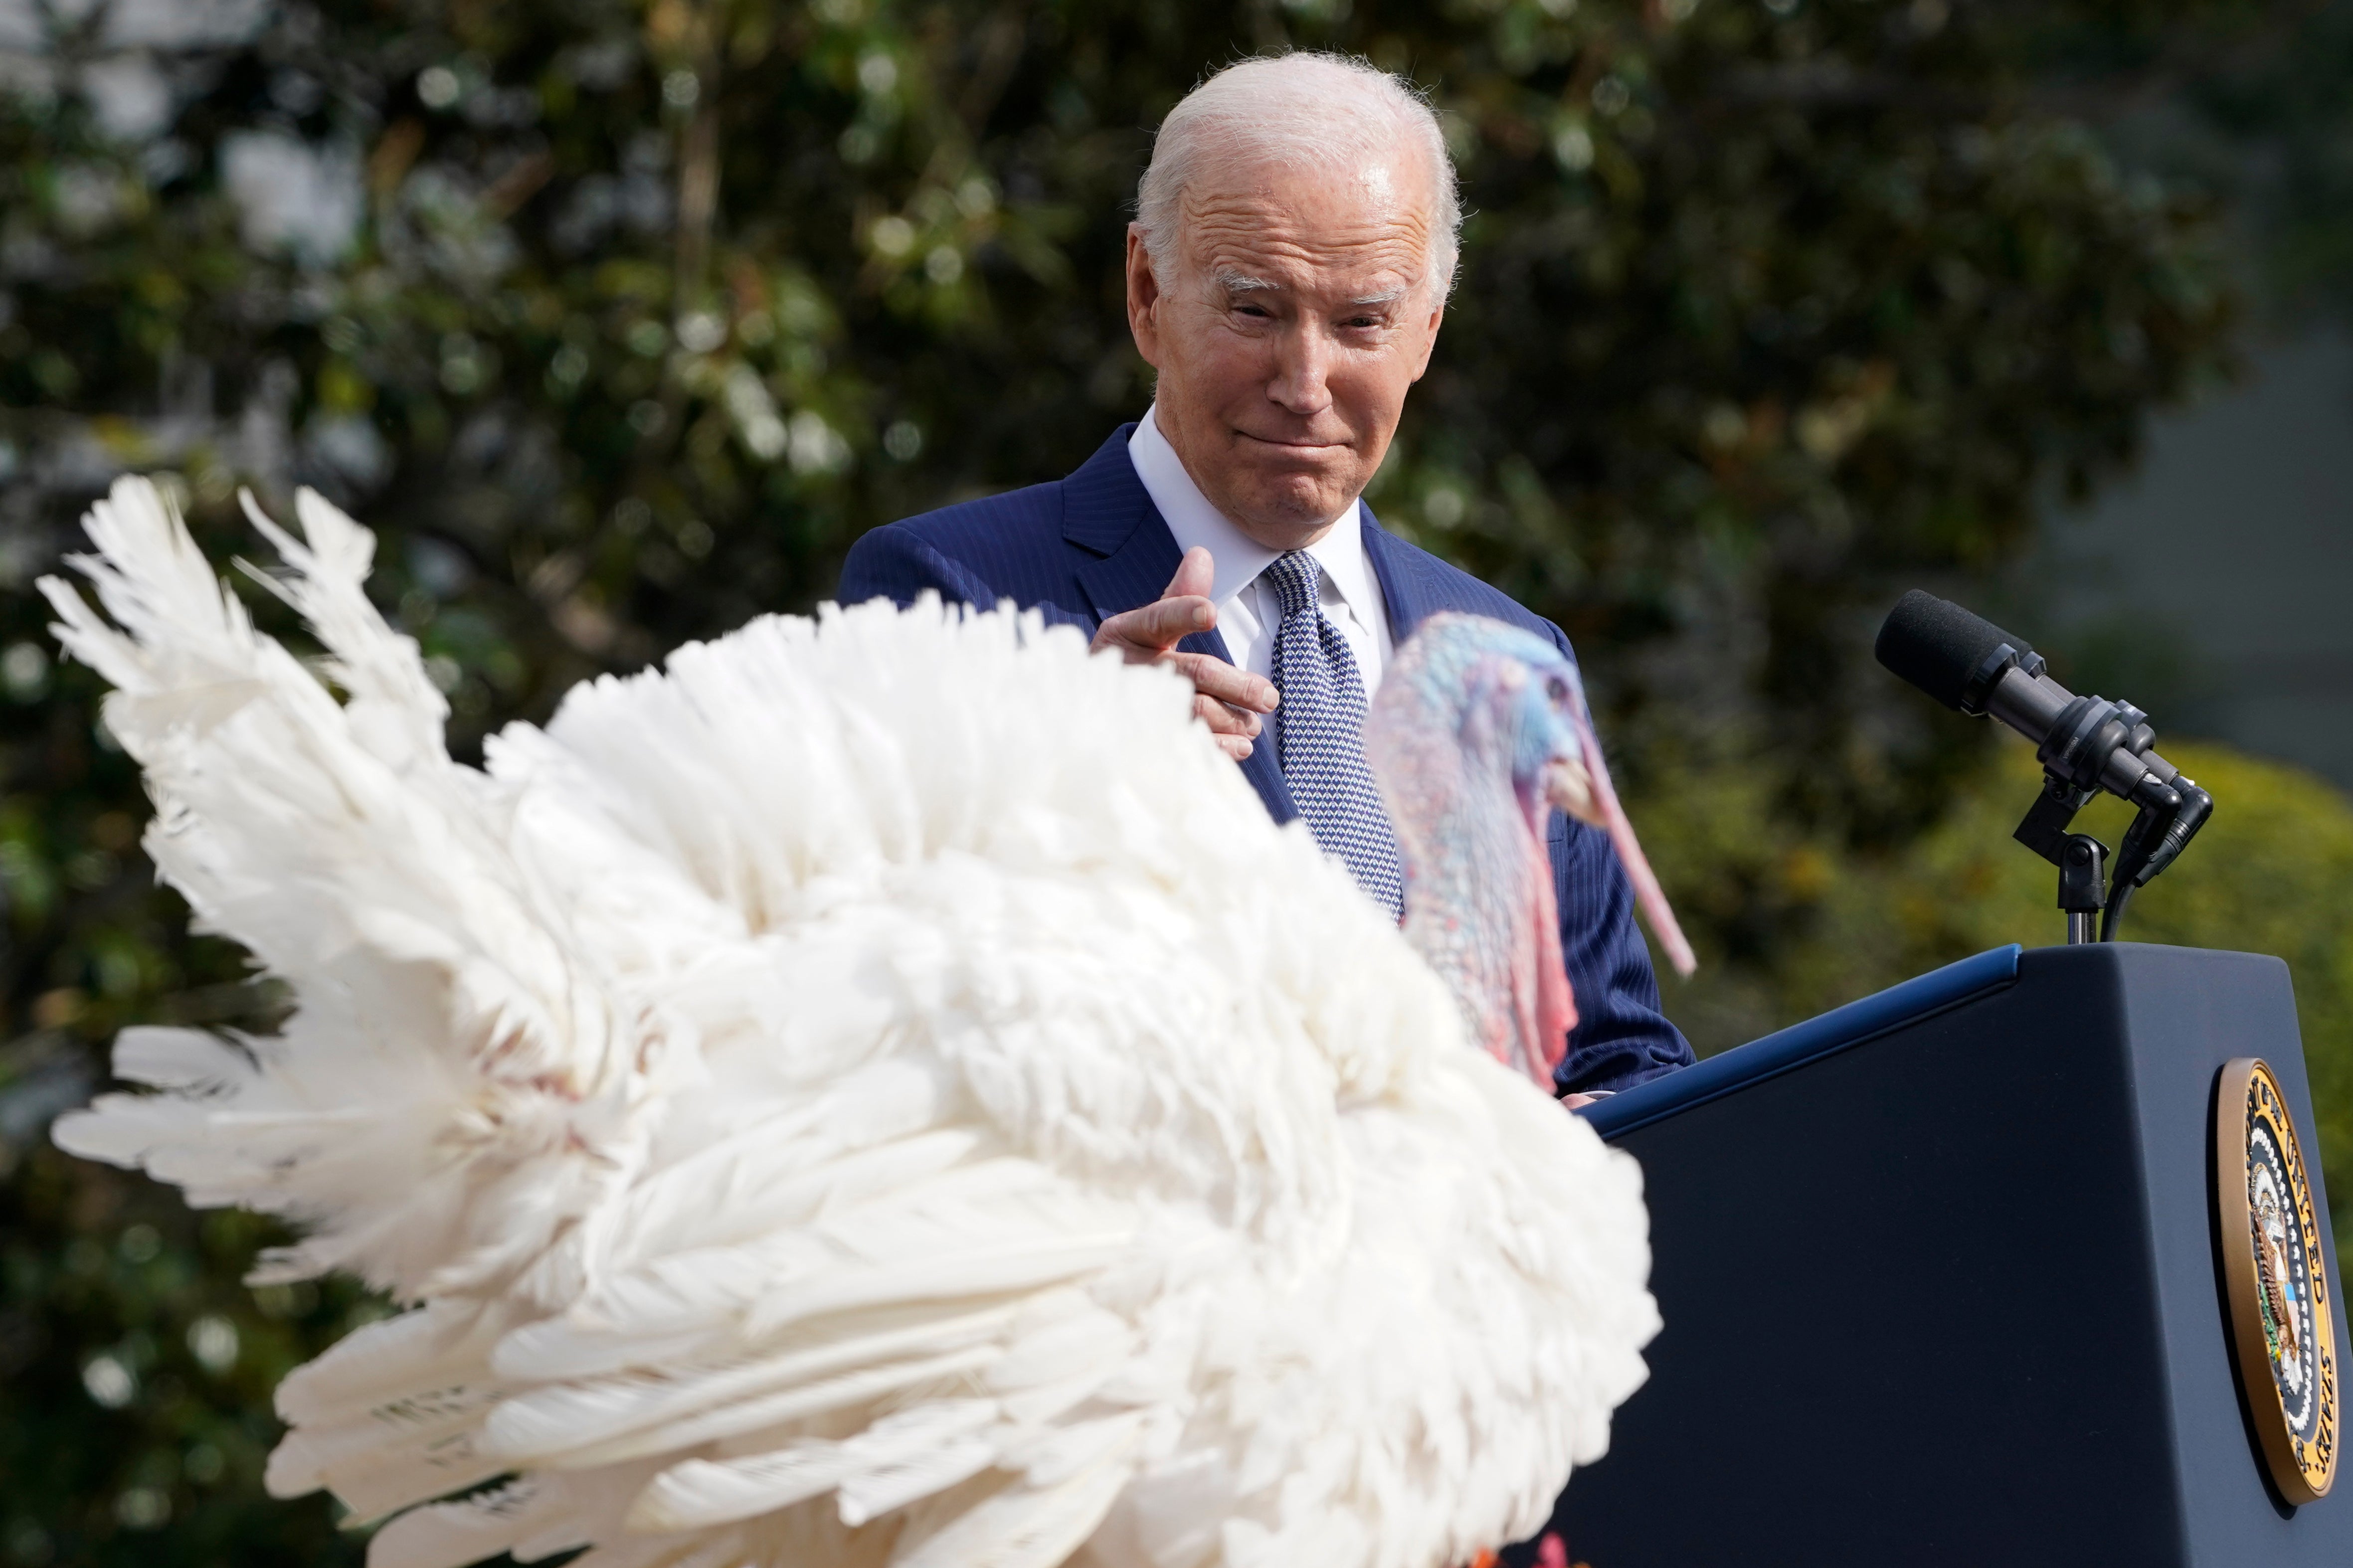 The president made multiple quips throughout the day on Monday as he presided over the annual turkey pardoning ceremony